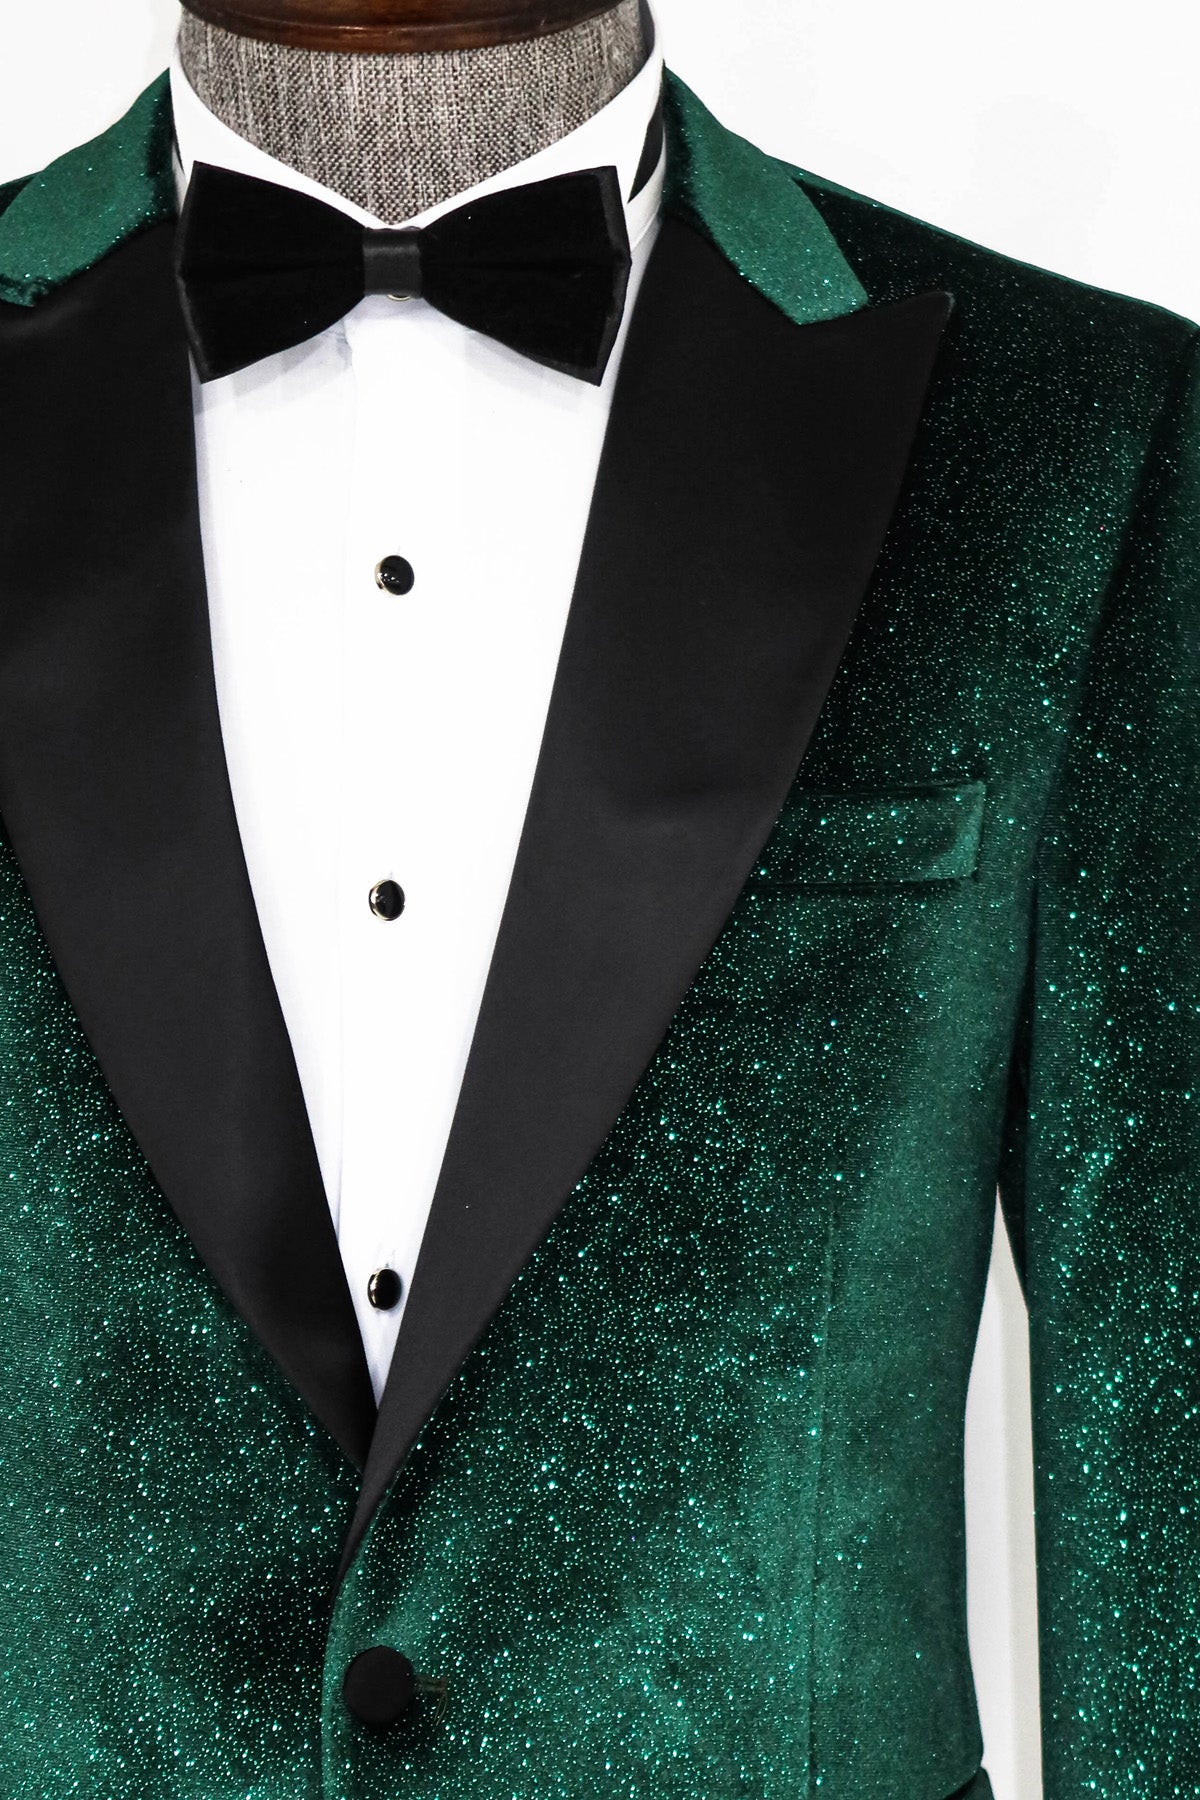 KCT Menswear - Men's Velvet Emerald Green Shiny Silver Sparkle Prom Blazer with Peak Black Satin Lapel - Luxurious and Stylish for Prom and Formal events